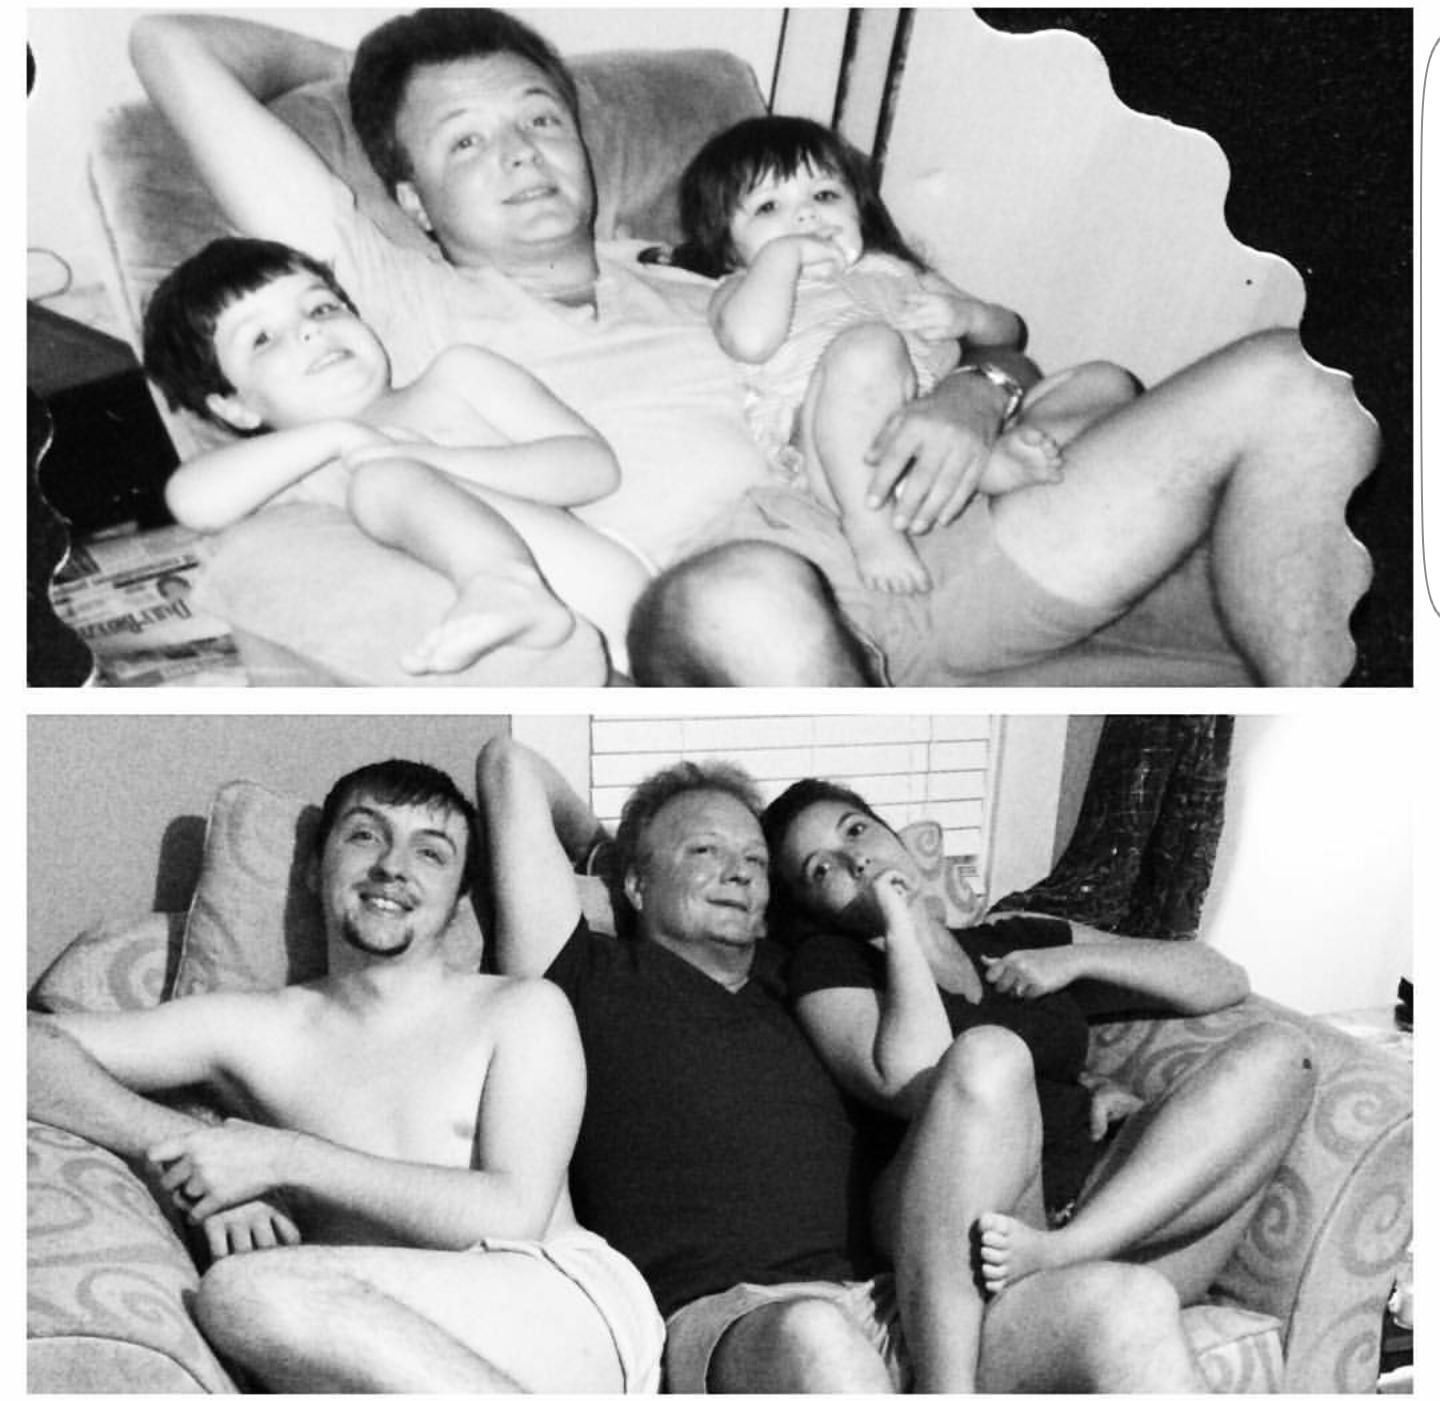 My mom wanted us to recreate this 20~ year old photo of my sister, my dad, and me. My family knows no boundaries.